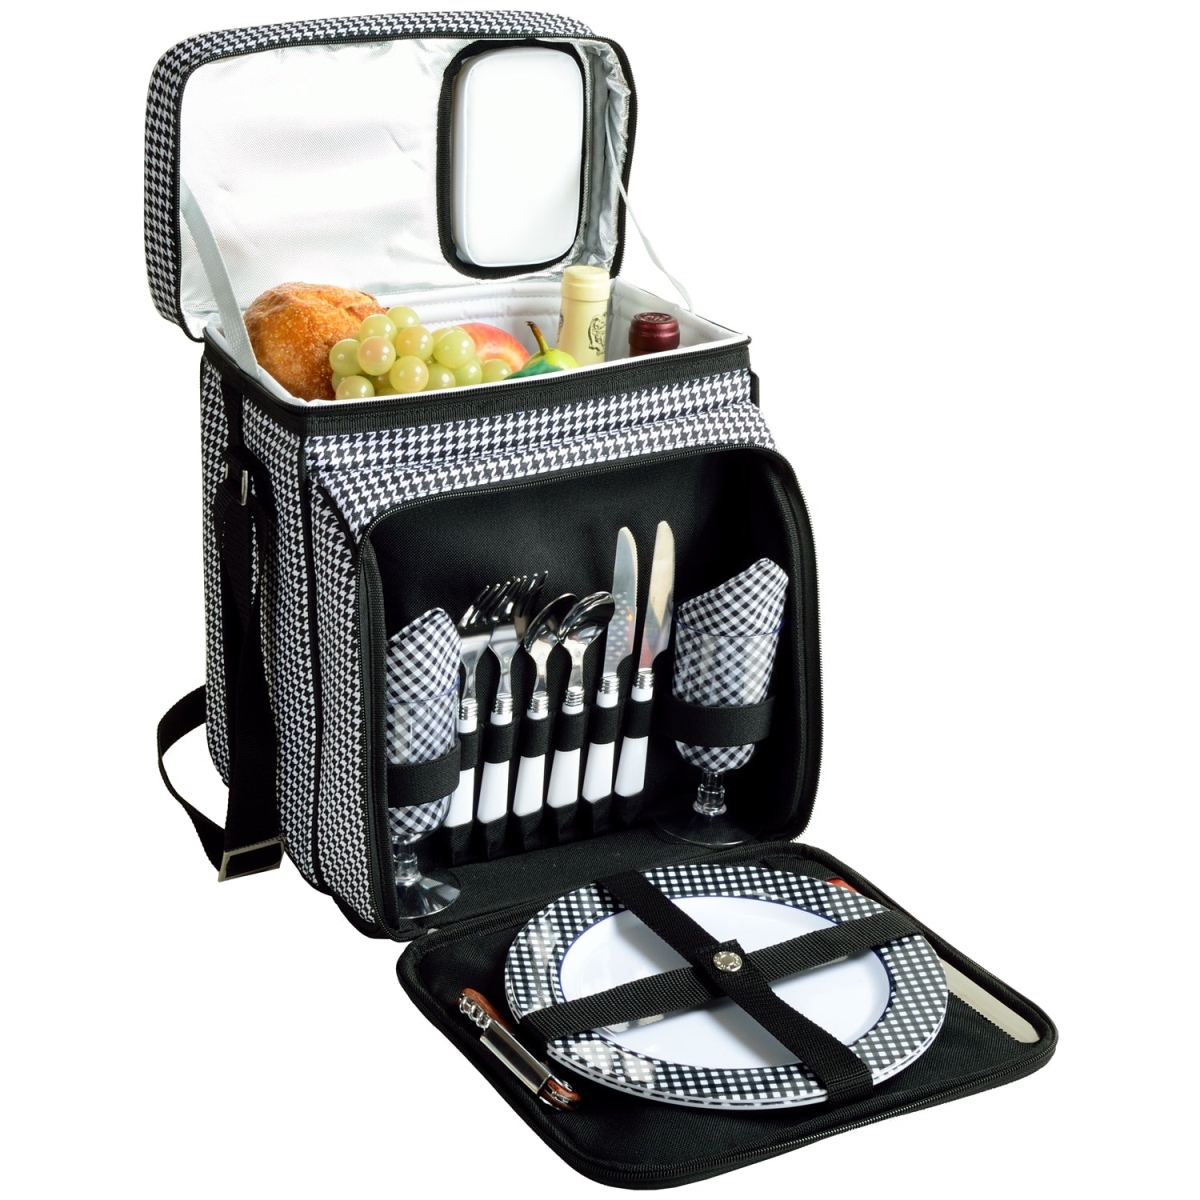 Picnic At Ascot 526-HT-PAA Picnic at Ascot Picnic Cooler with Service for 2 (526) - Houndstooth